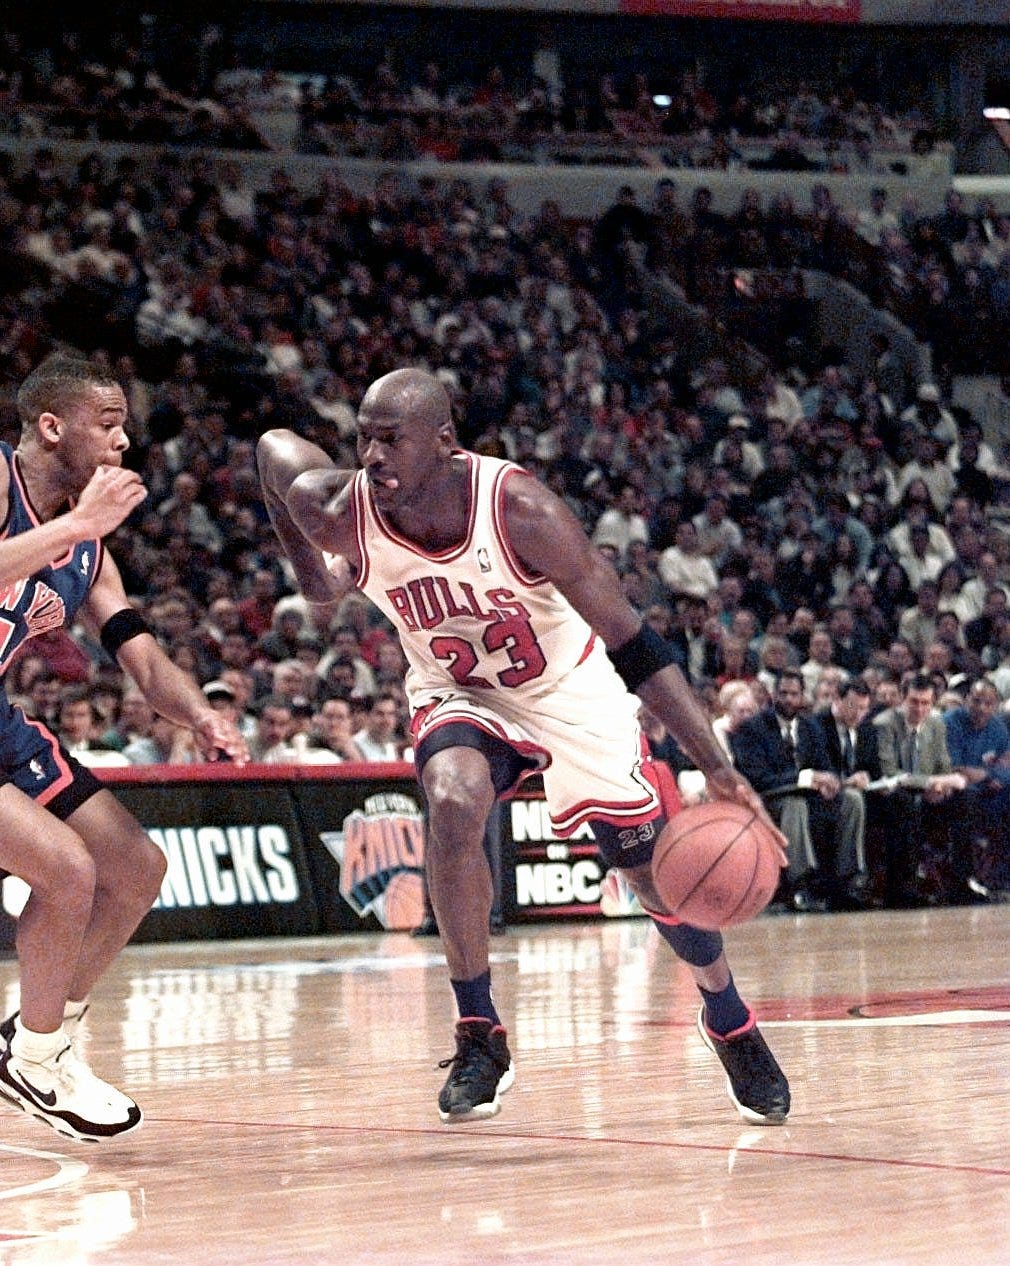 ESPN moves up release for 'The Last Dance' documentary on Michael Jordan, 1990s Bulls, per report - USA TODAY